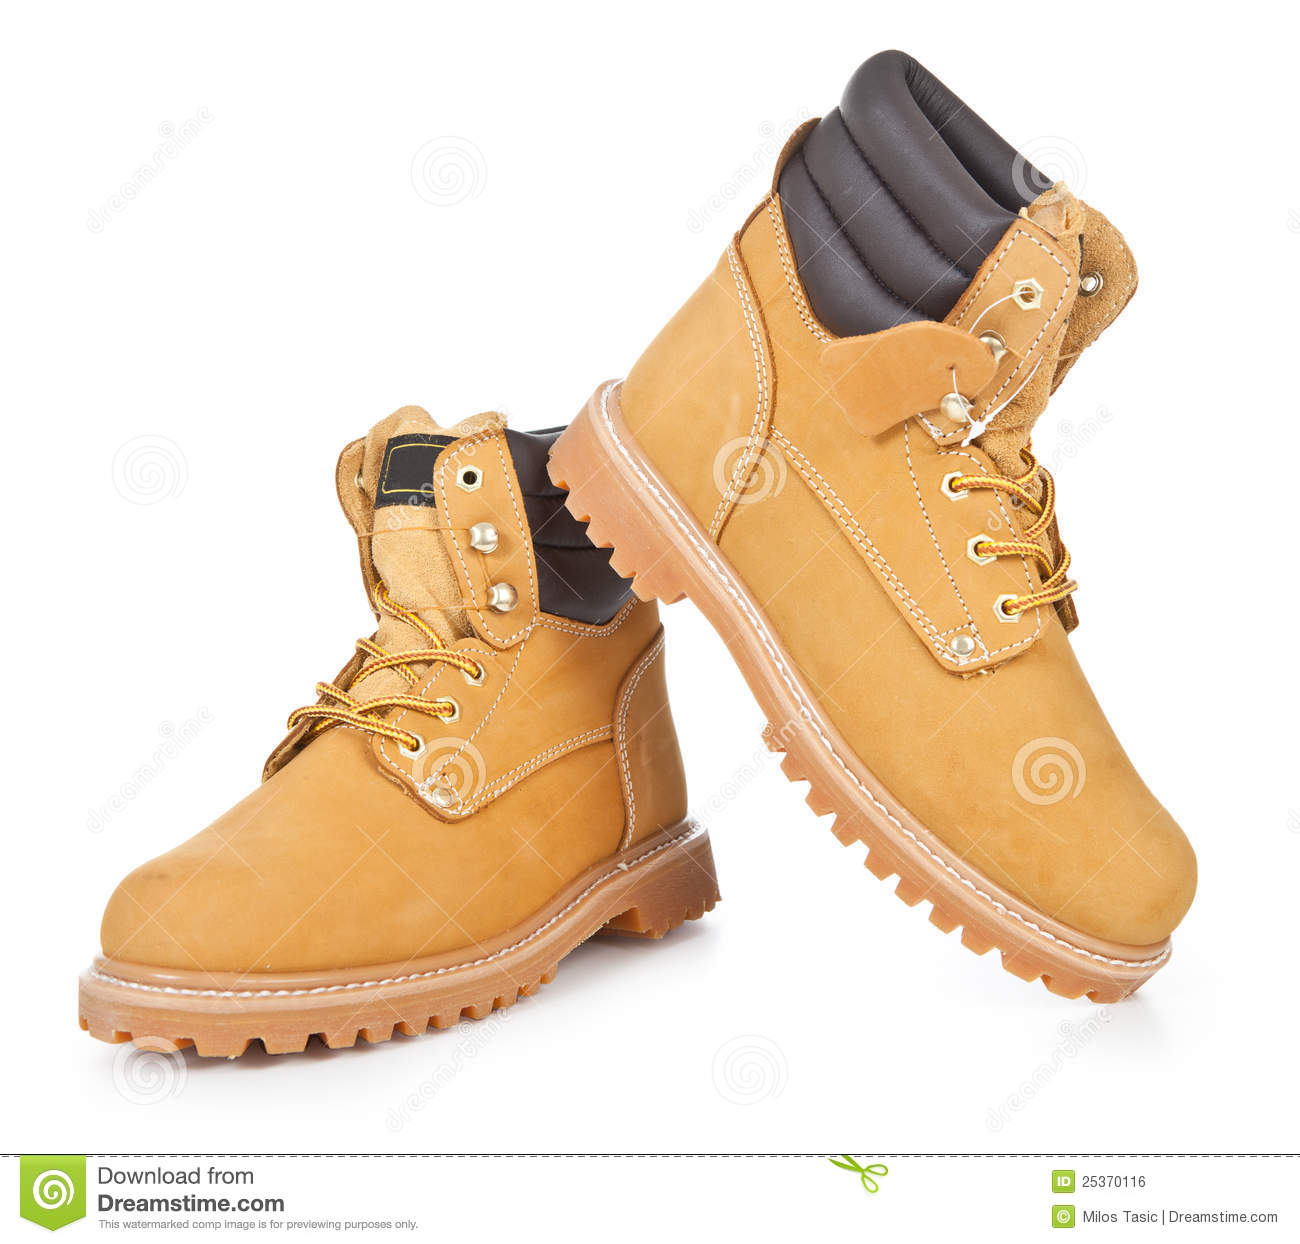 Work Boots Royalty Free Stock Image   Image  25370116